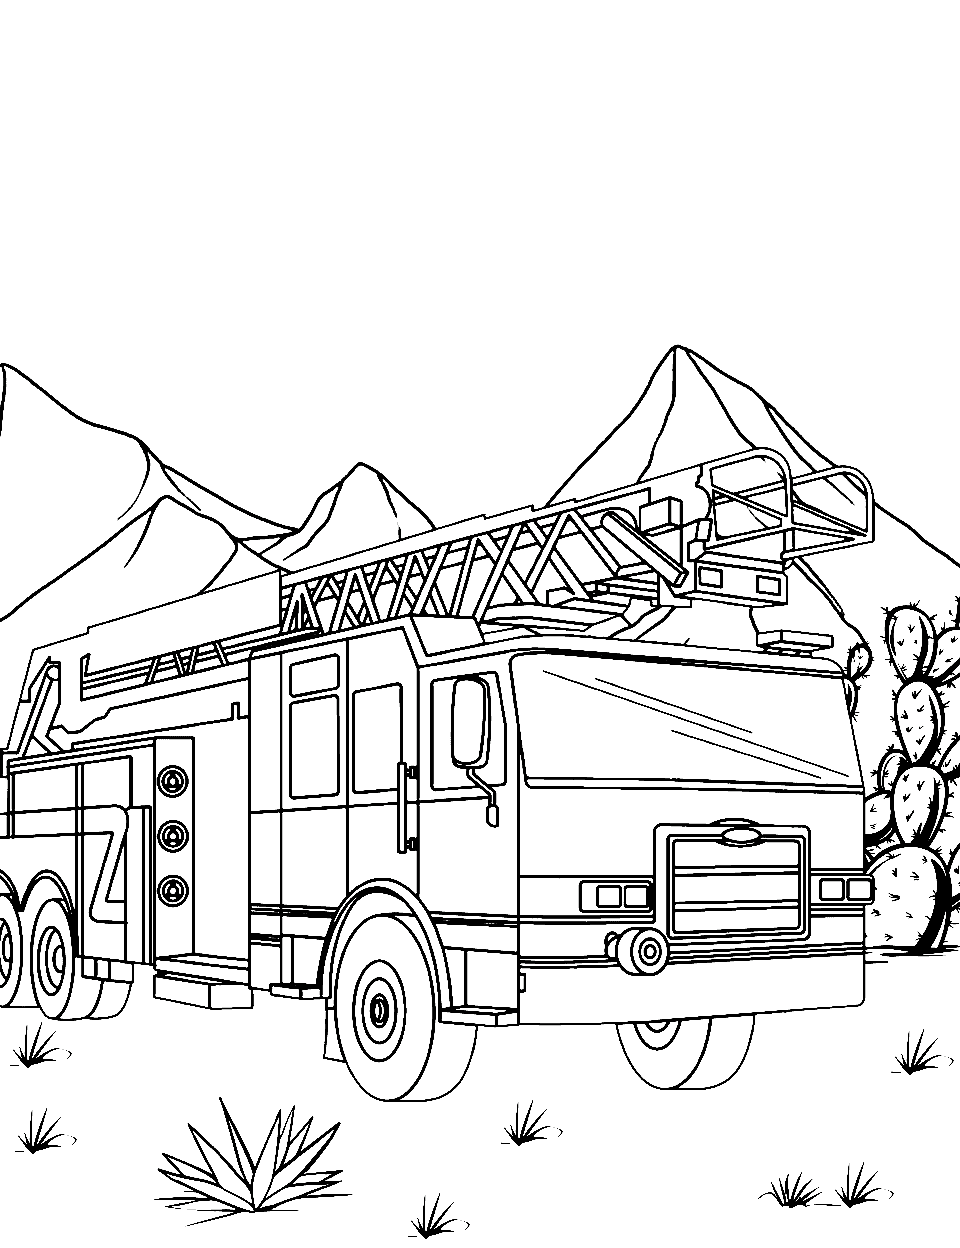 Fire truck coloring pages free printable sheets